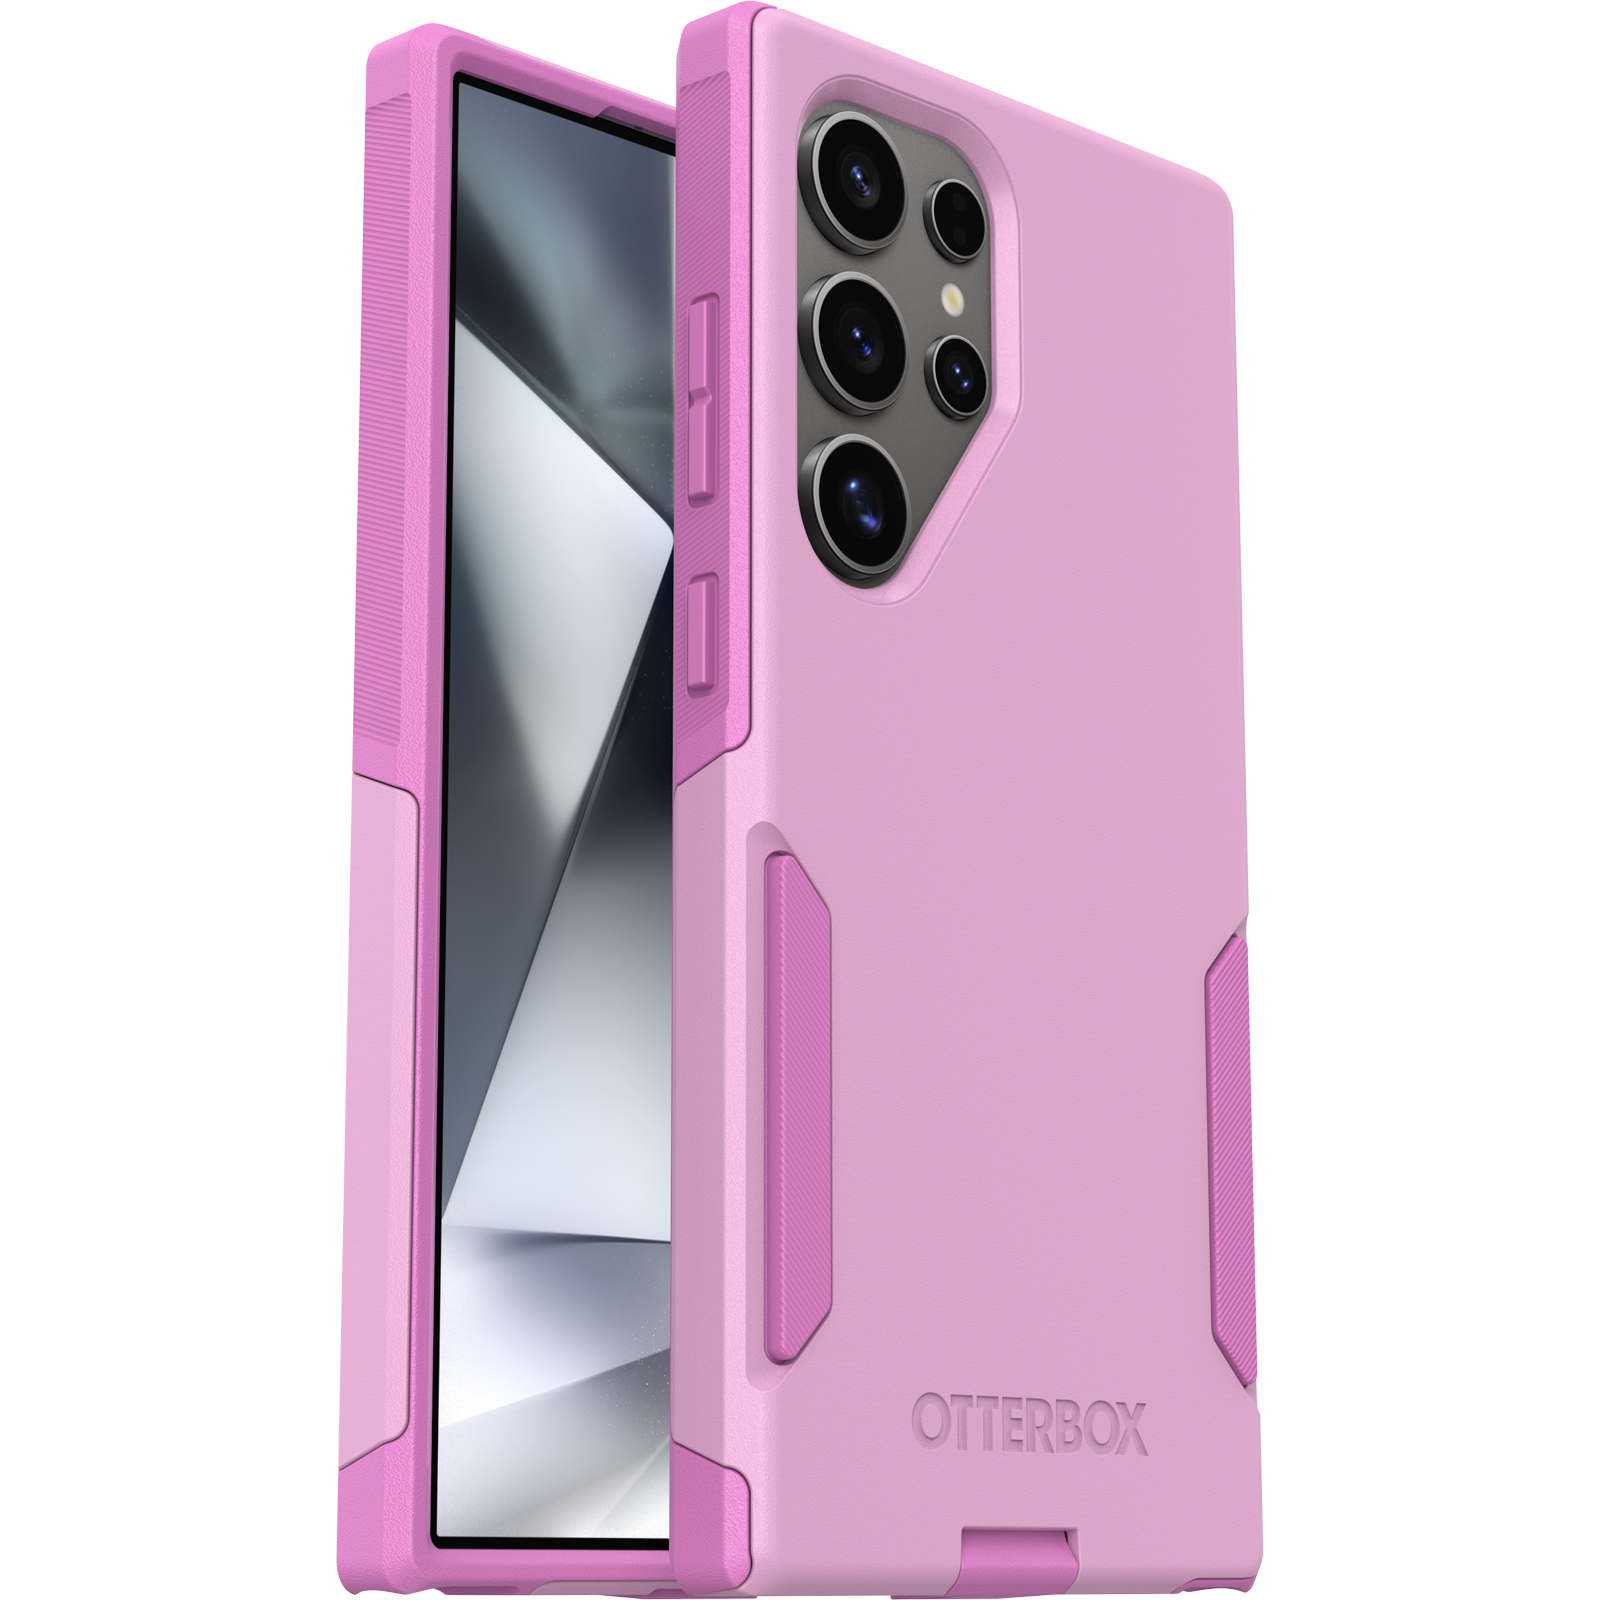 https://www.otterbox.com/on/demandware.static/-/Sites-masterCatalog/en/dw1824b624/productimages/dis/cases-screen-protection/commuter-galaxy-s24-ultra/commuter-galaxy-s24-ultra-run-wildflower-1.jpg